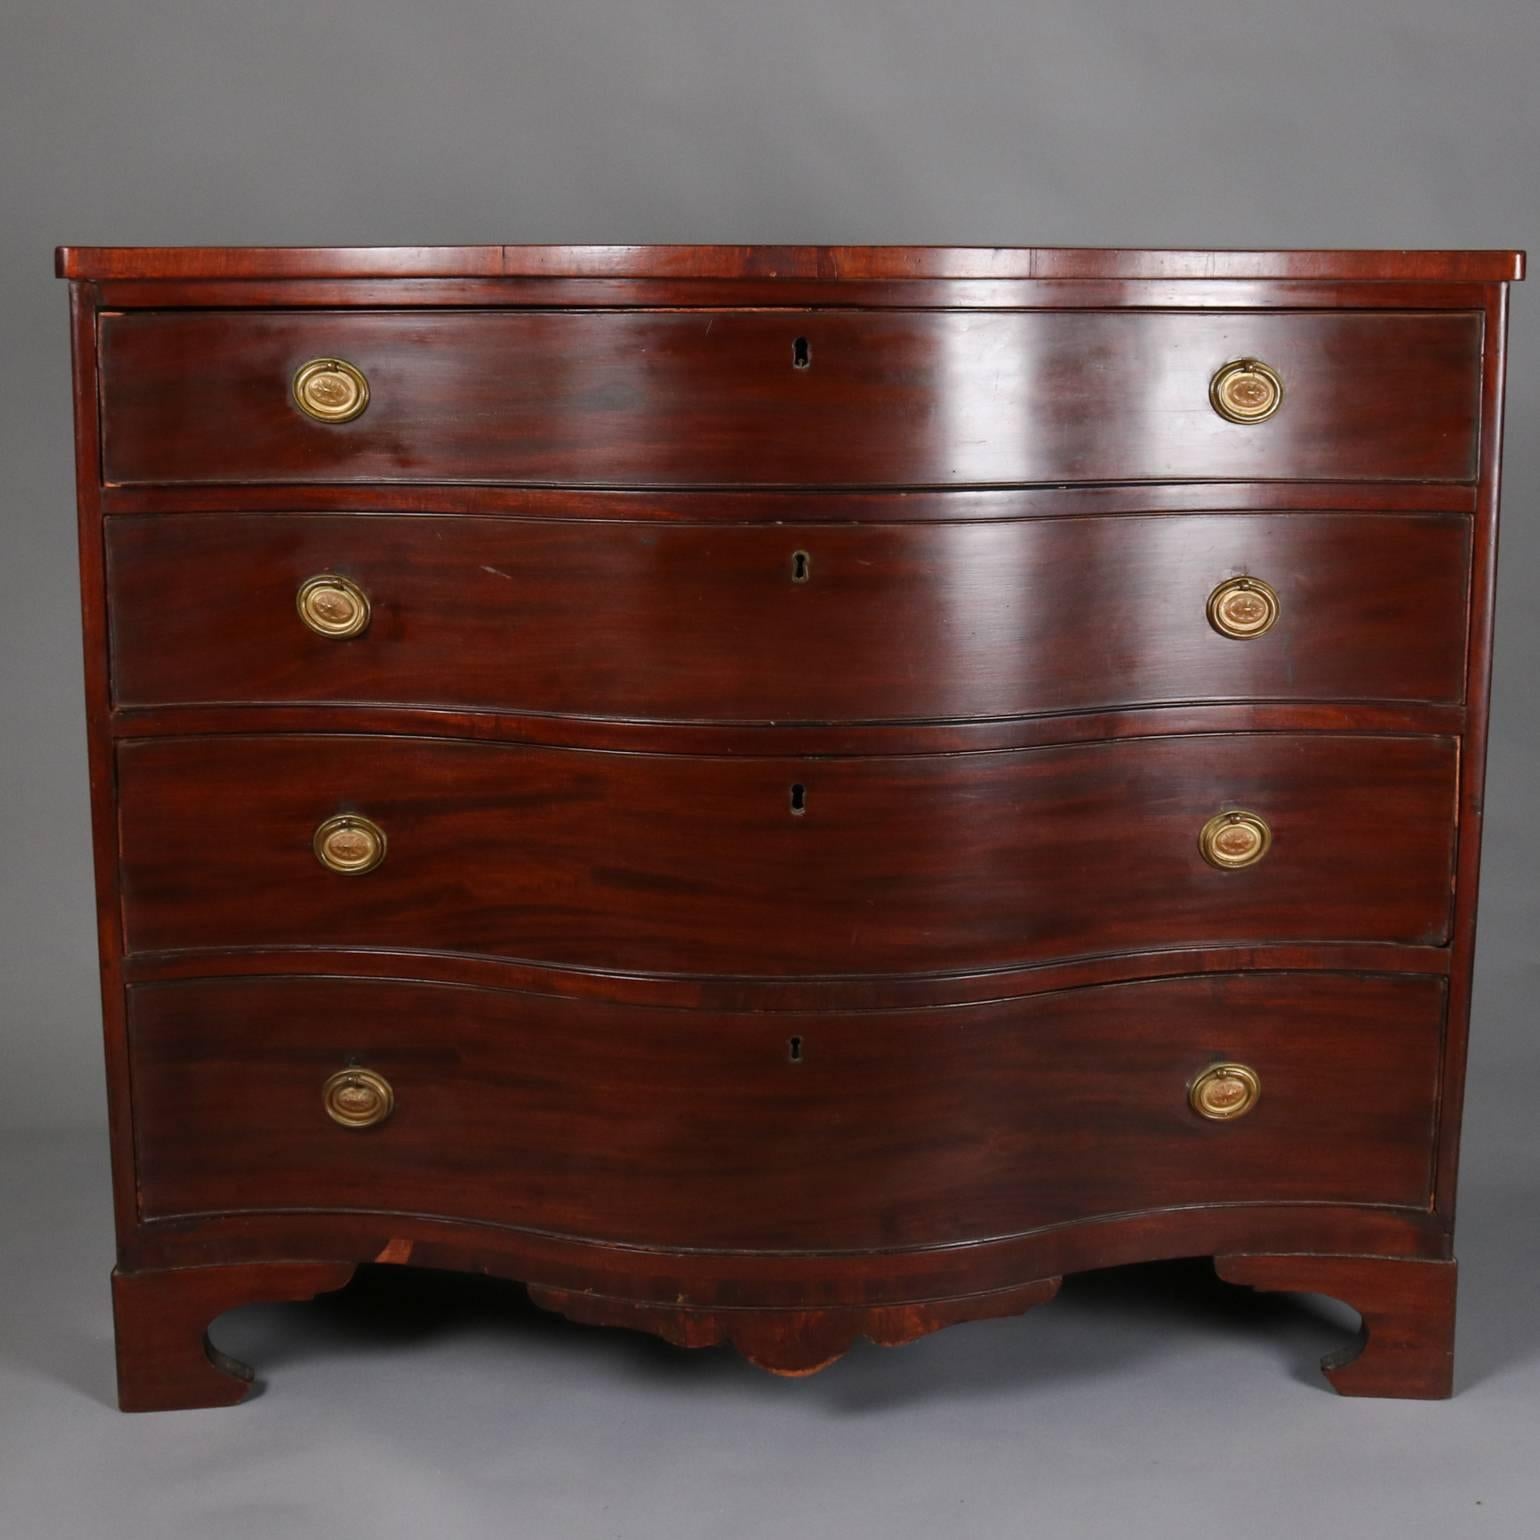 19th century English swell front dresser features mahogany construction with four long drawers and seated on ogee feet, bronze pulls

Measures - 38